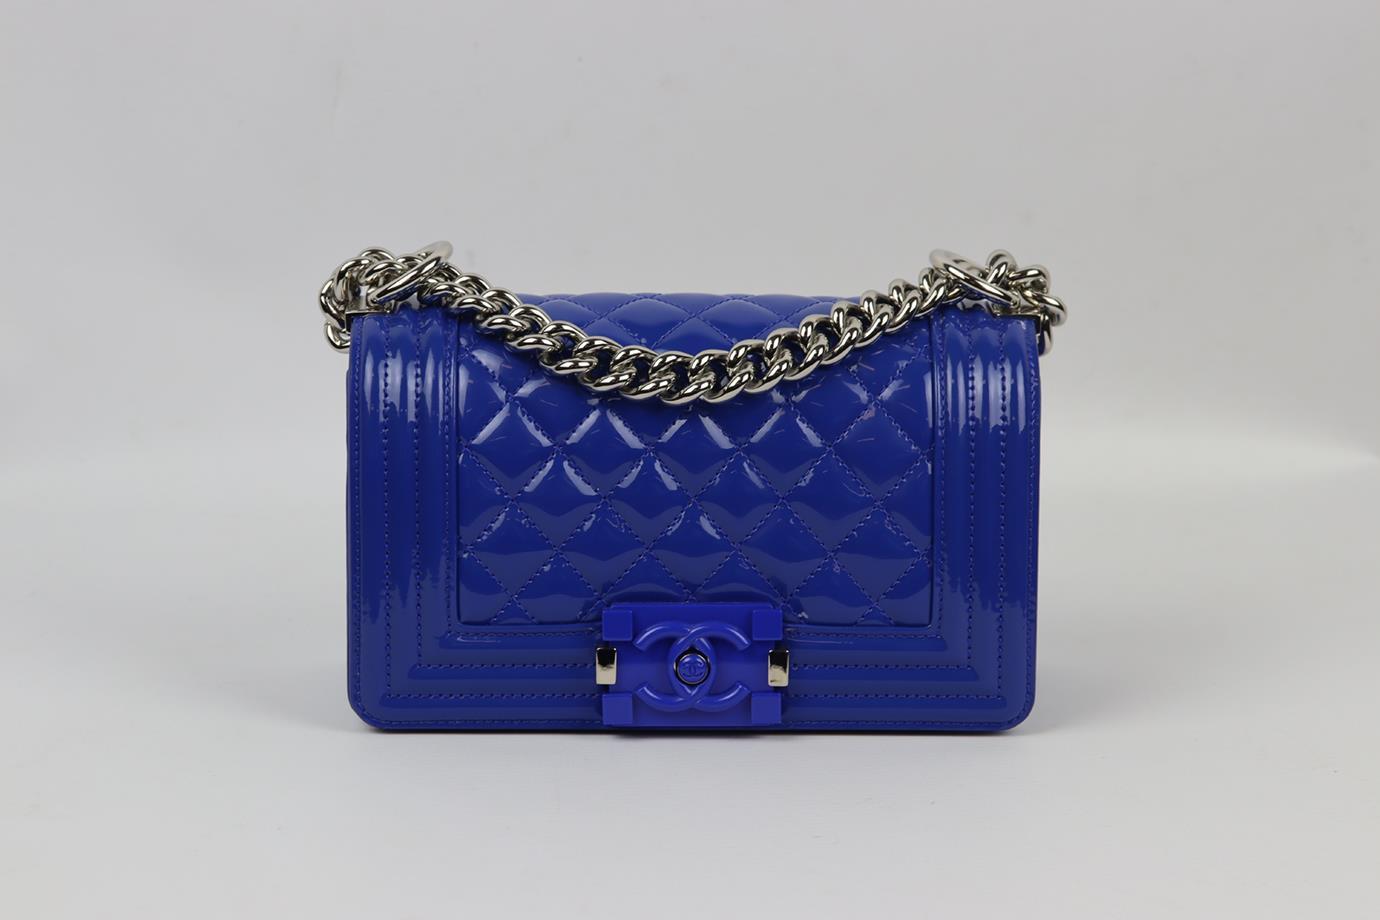 Chanel 2015 Boy small quilted patent leather shoulder bag. Made from bright-blue quilted patent-leather with matching leather interior and palladium chain shoulder straps. Blue. Push lock fastening at front. Comes with authenticity card. Protective